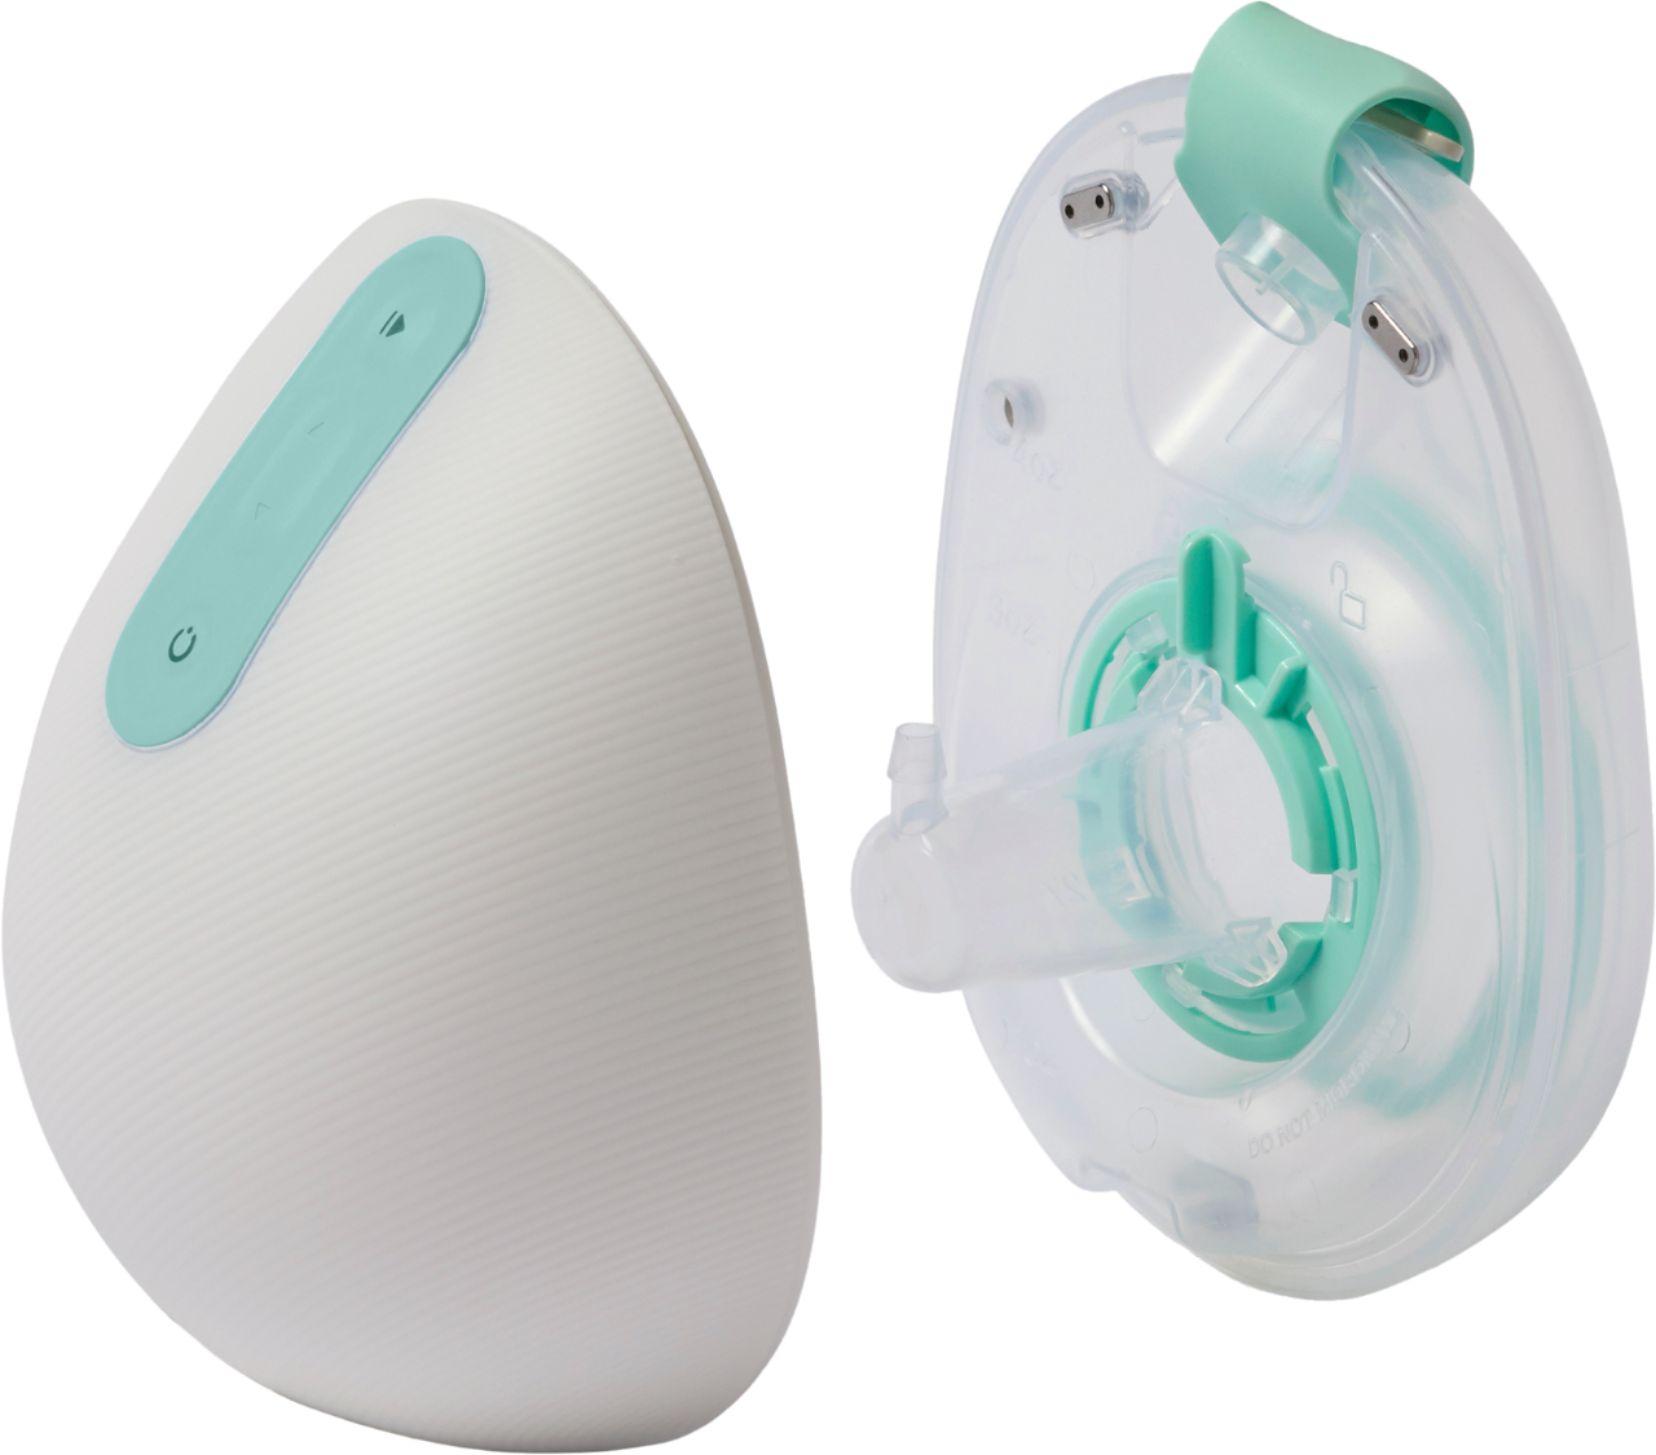 Willow 3.0 Pump Reusable Breast Milk Containers, 27mm Flange, 2 Ct, Holds 4  oz. Per Container, Breastfeeding Essential for The Willow 3.0 Wearable